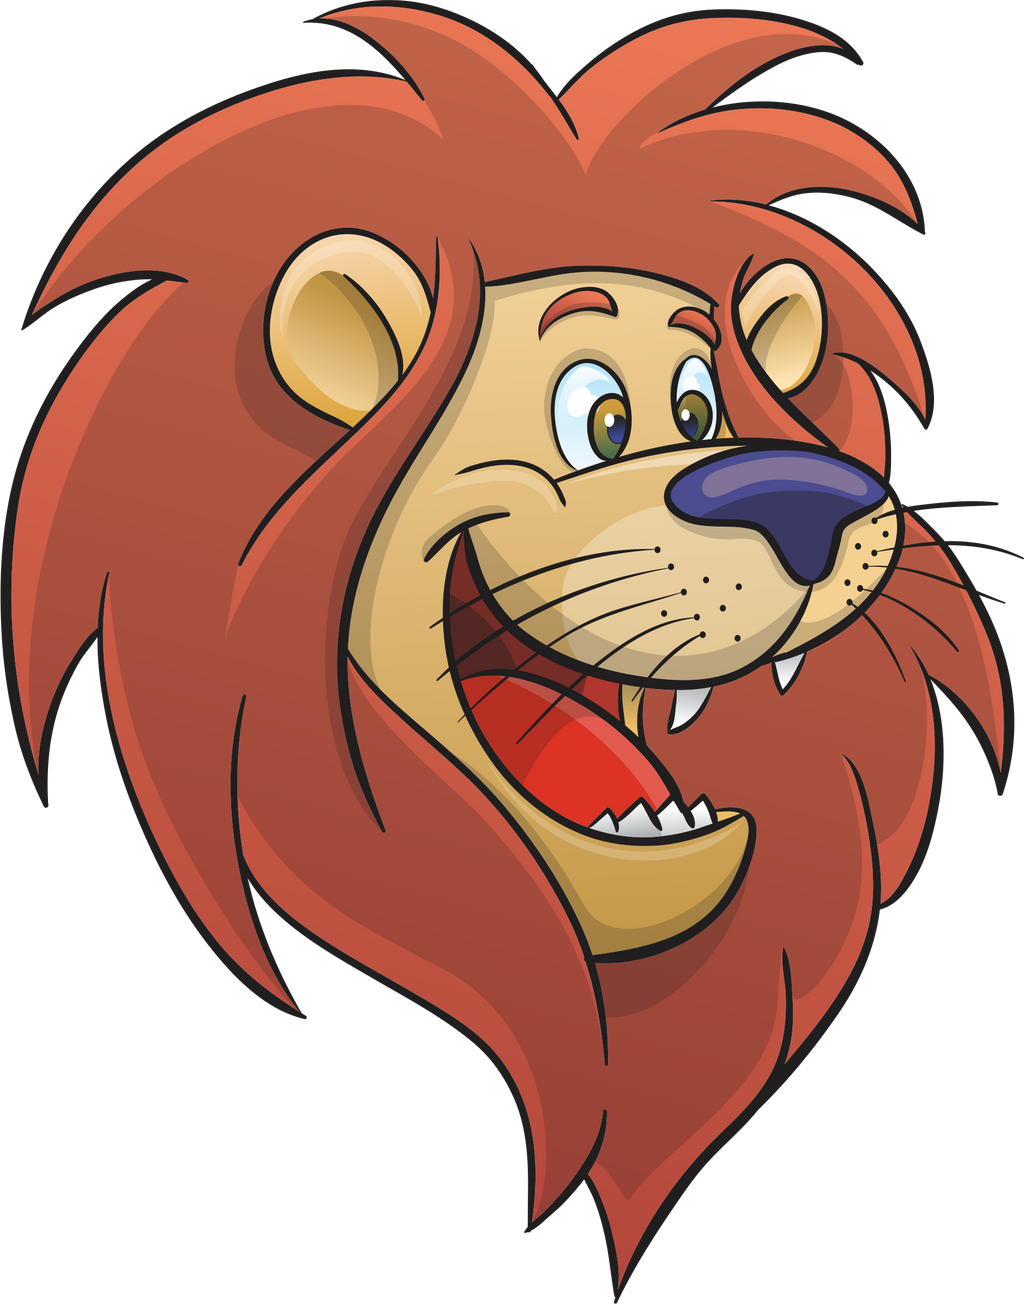 Cartoon lion face by alexmarques d47pewg